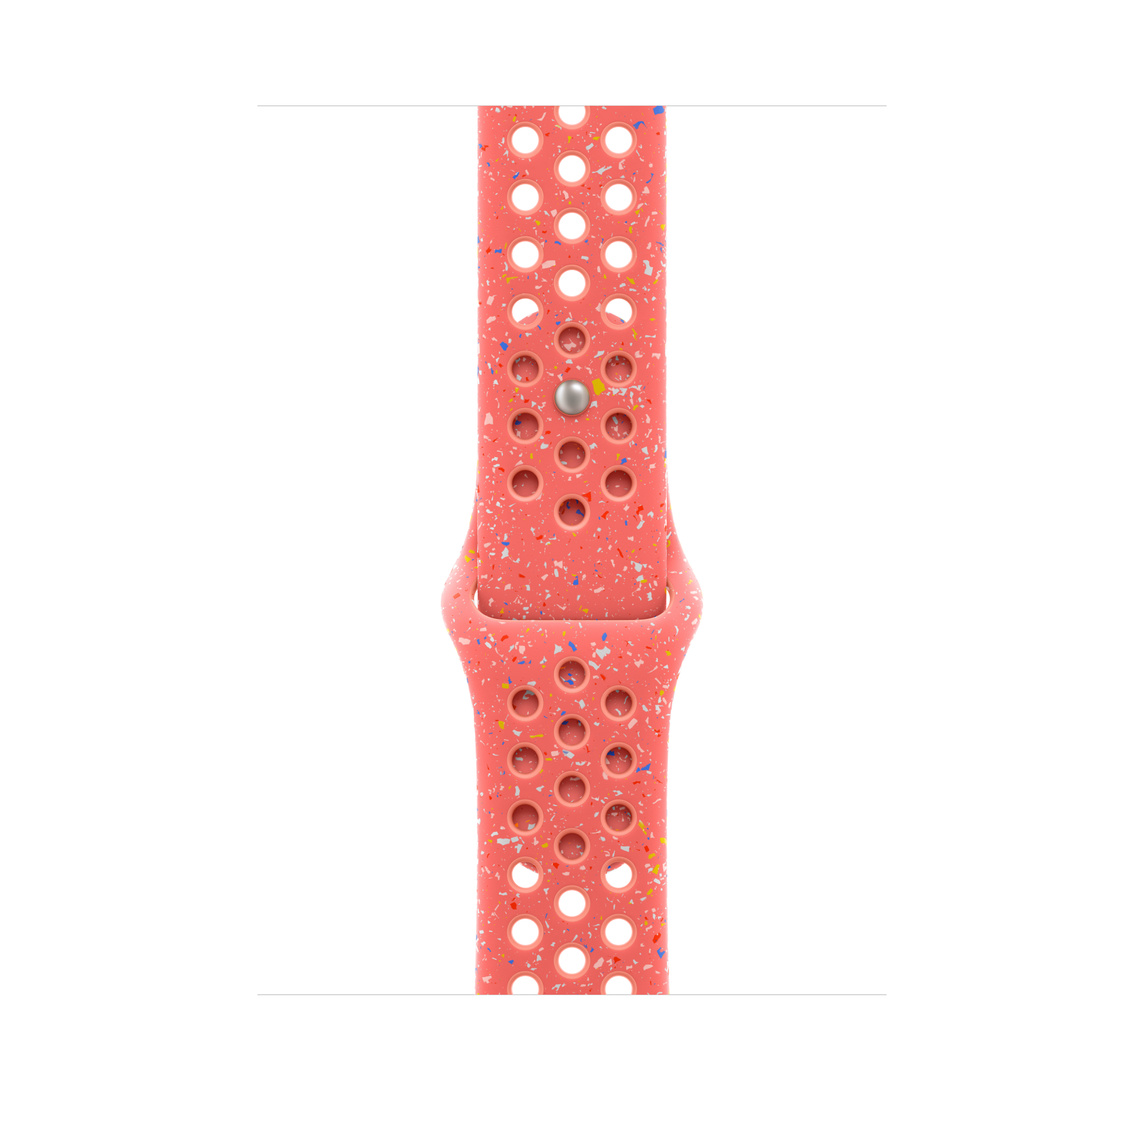 Magic Ember (orange) Nike Sport Band, smooth fluoroelastomer with perforations for breathability and pin-and-tuck closure